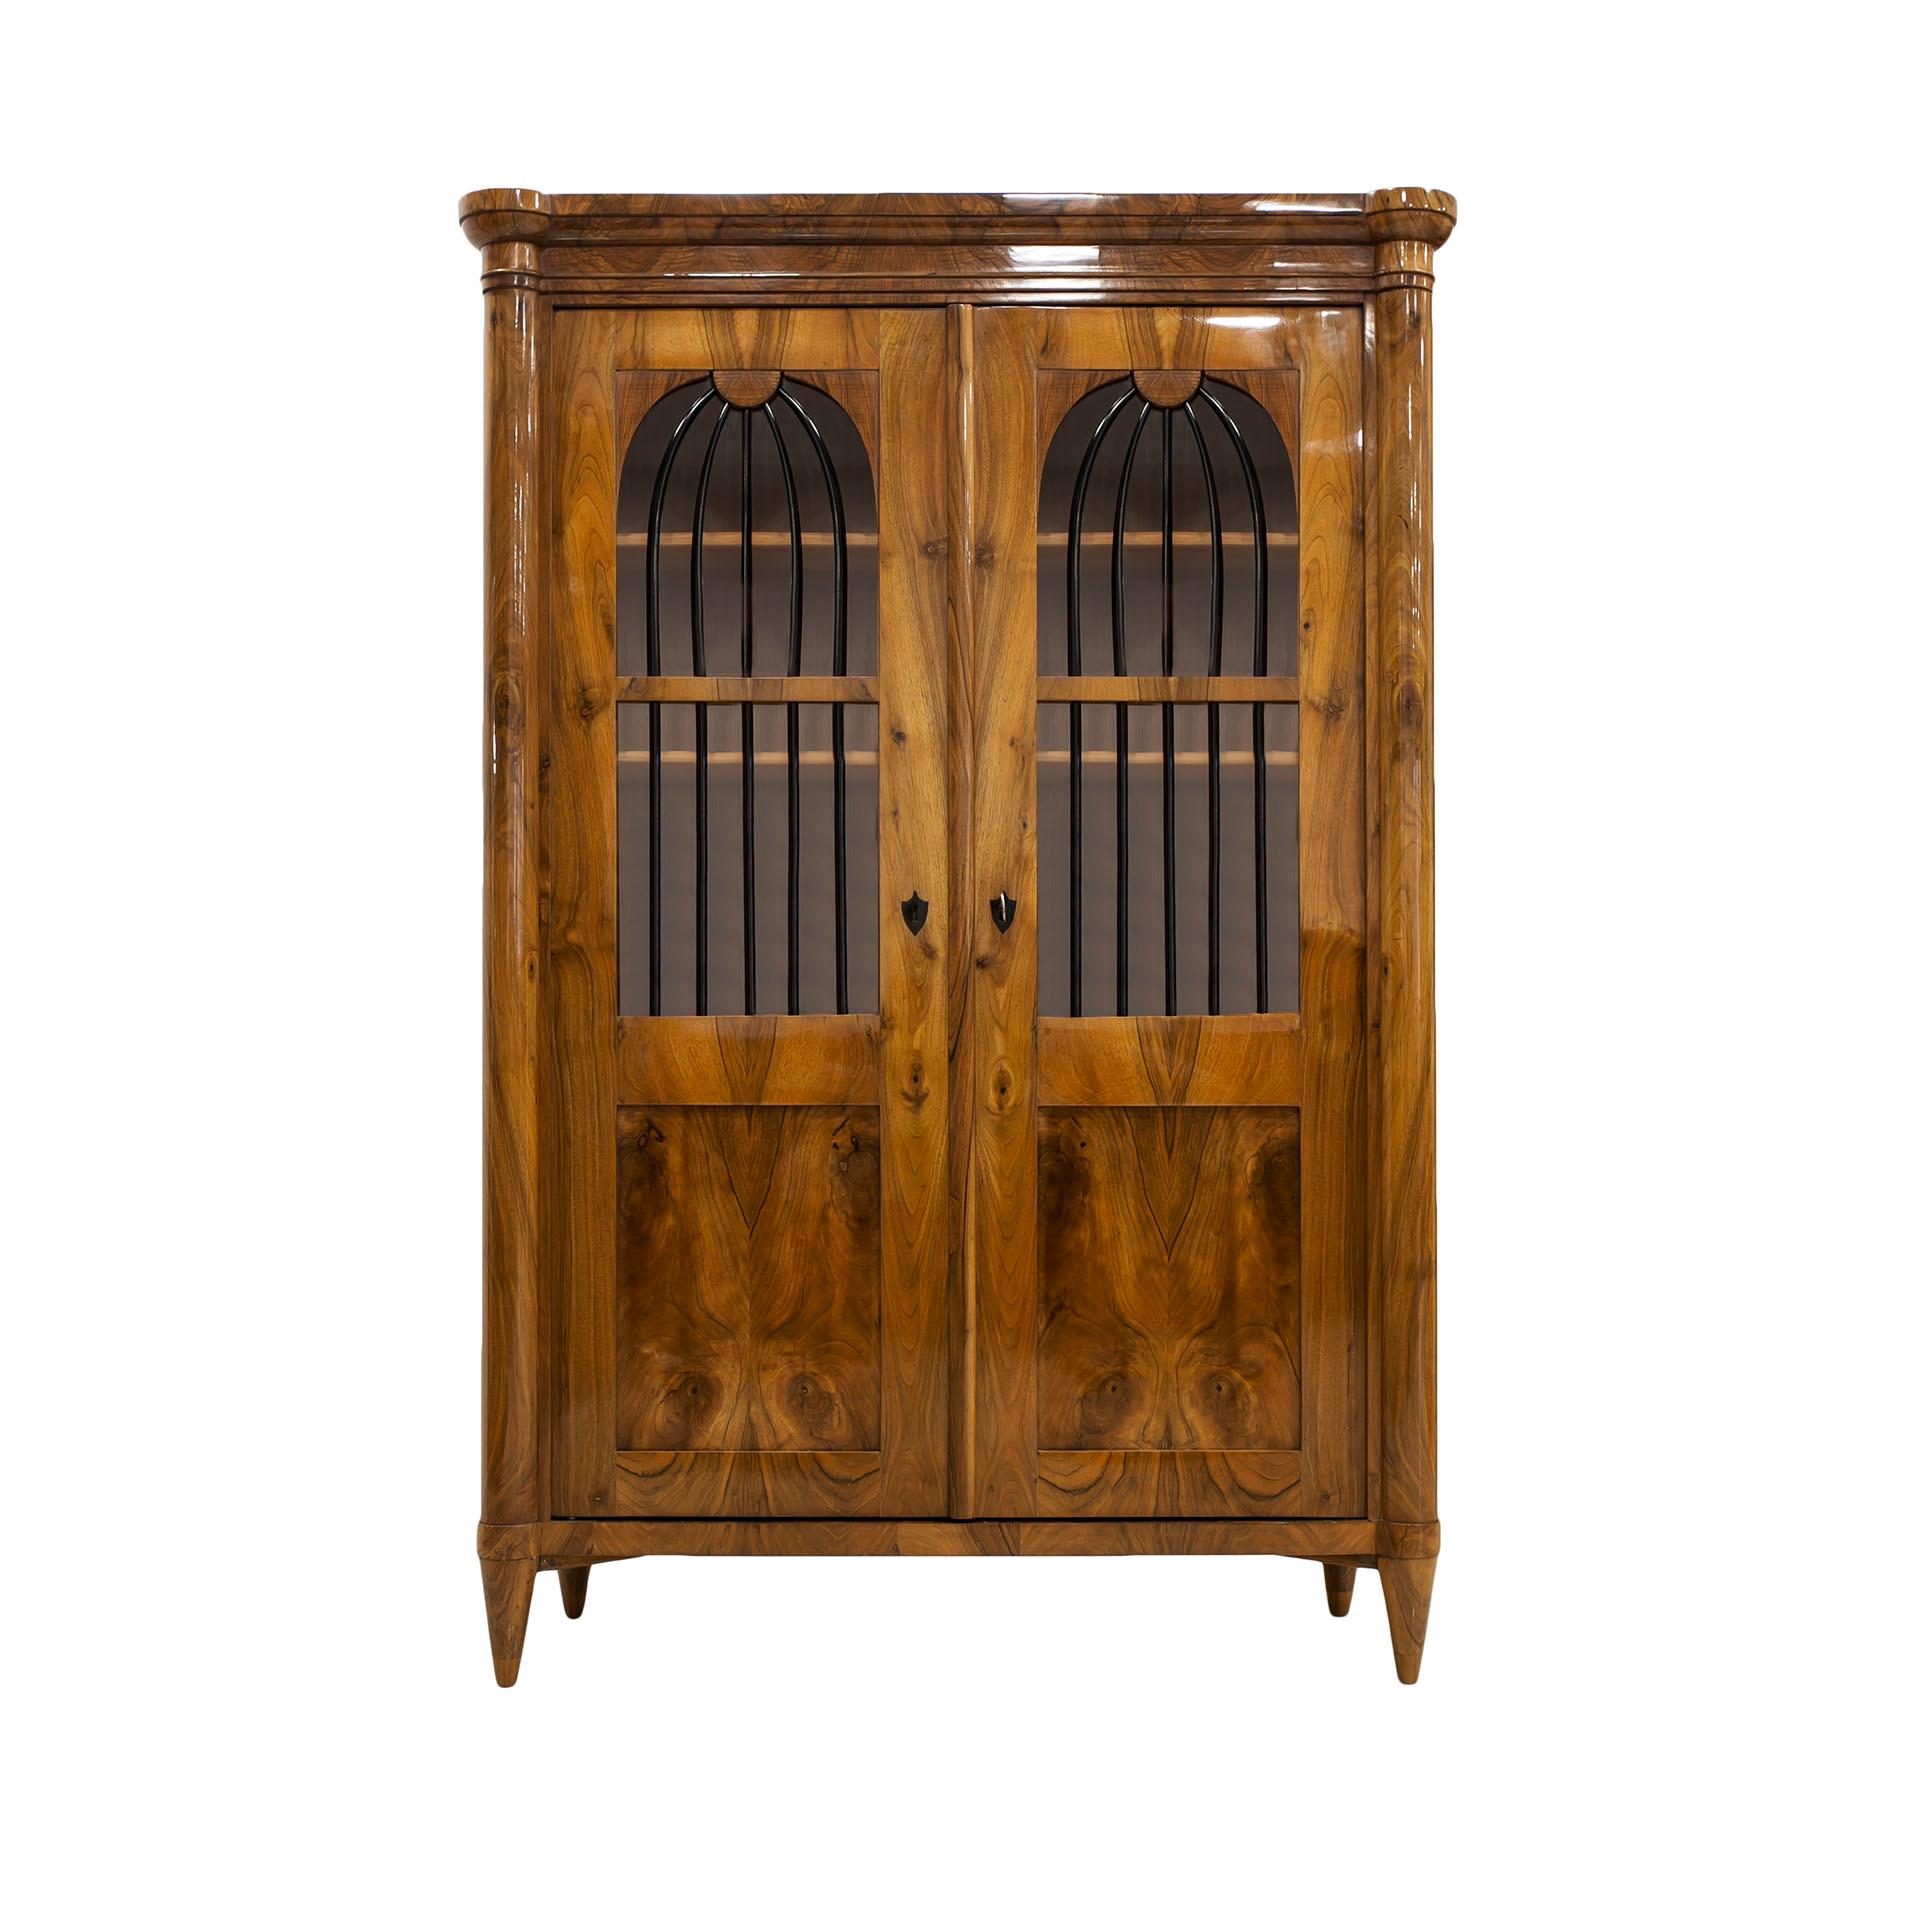 This Biedermeier vitrine comes from Germany from the first half of 19th century. The piece is made of coniferous wood, veneered with beautiful walnut veneer. It is after professional renovation and is in very good condition. It features beautifully